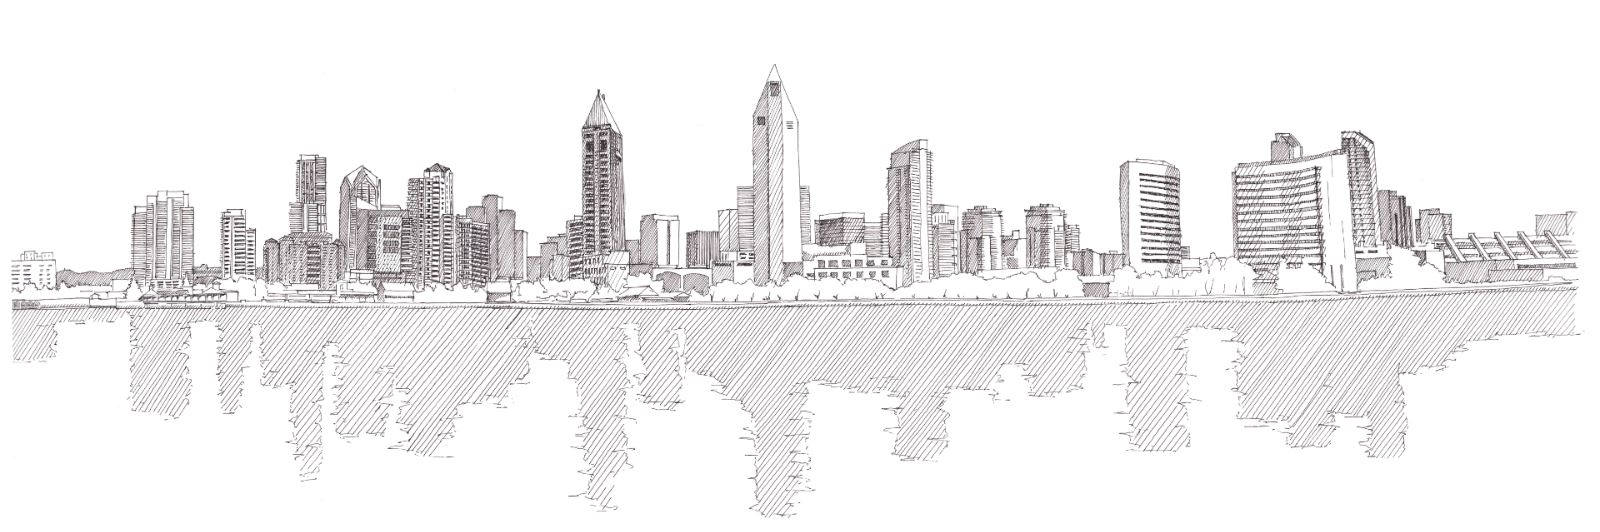 San Diego Skyline Sketch at Explore collection of